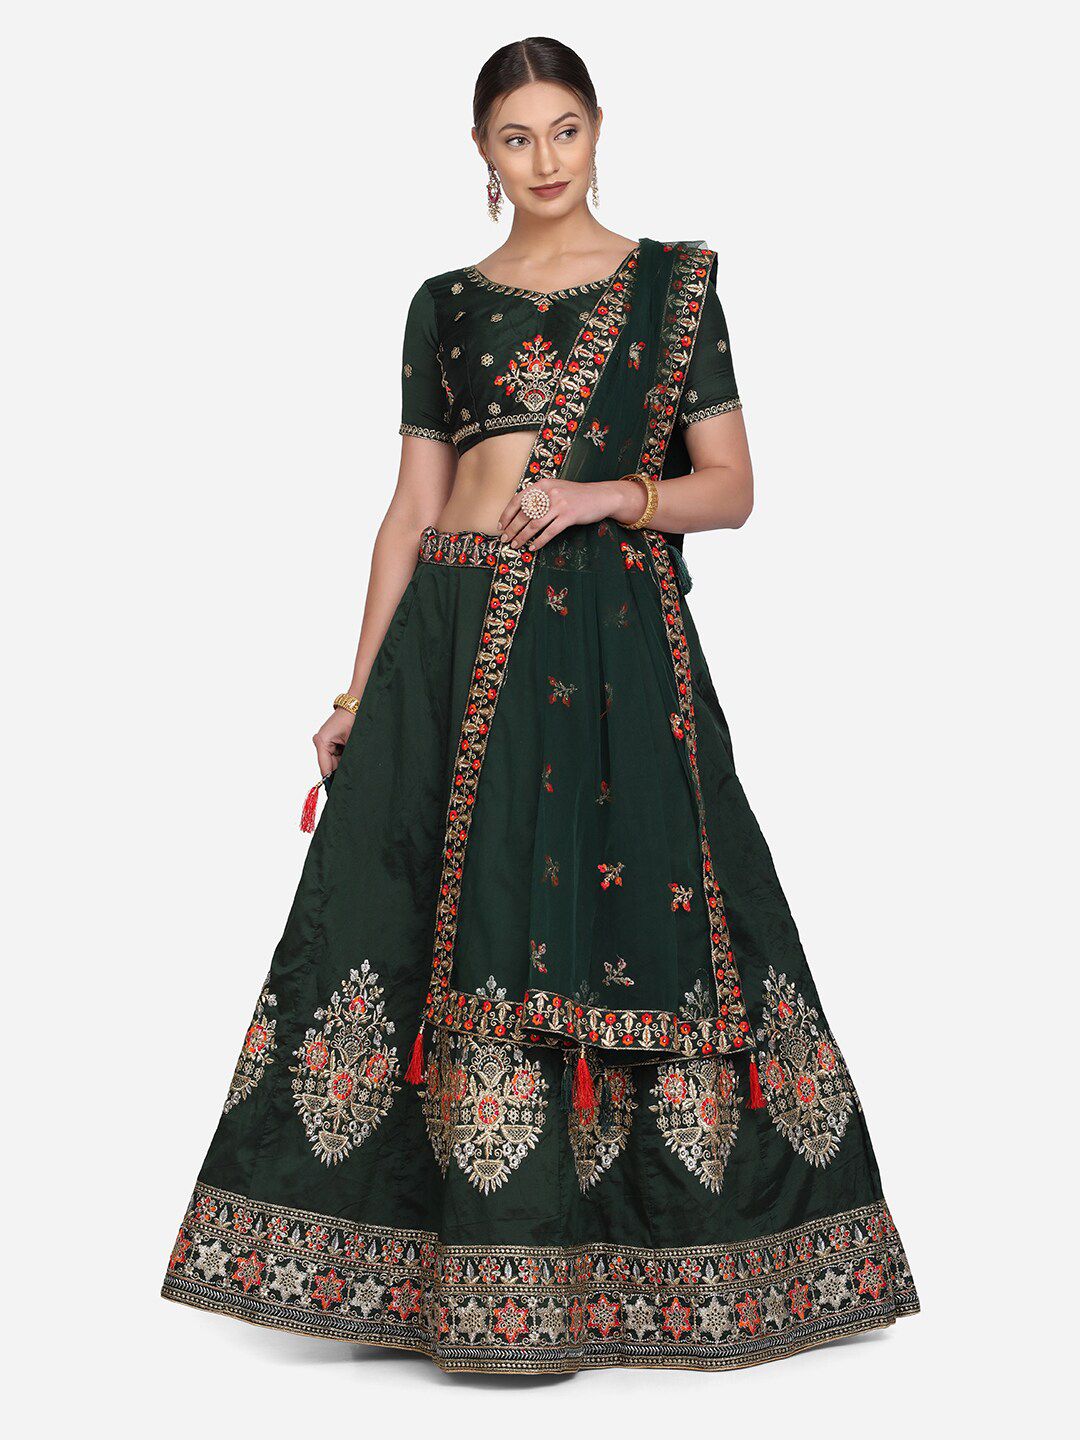 Warthy Ent Green Embroidered Semi-Stitched Lehenga & Unstitched Blouse With Dupatta Price in India